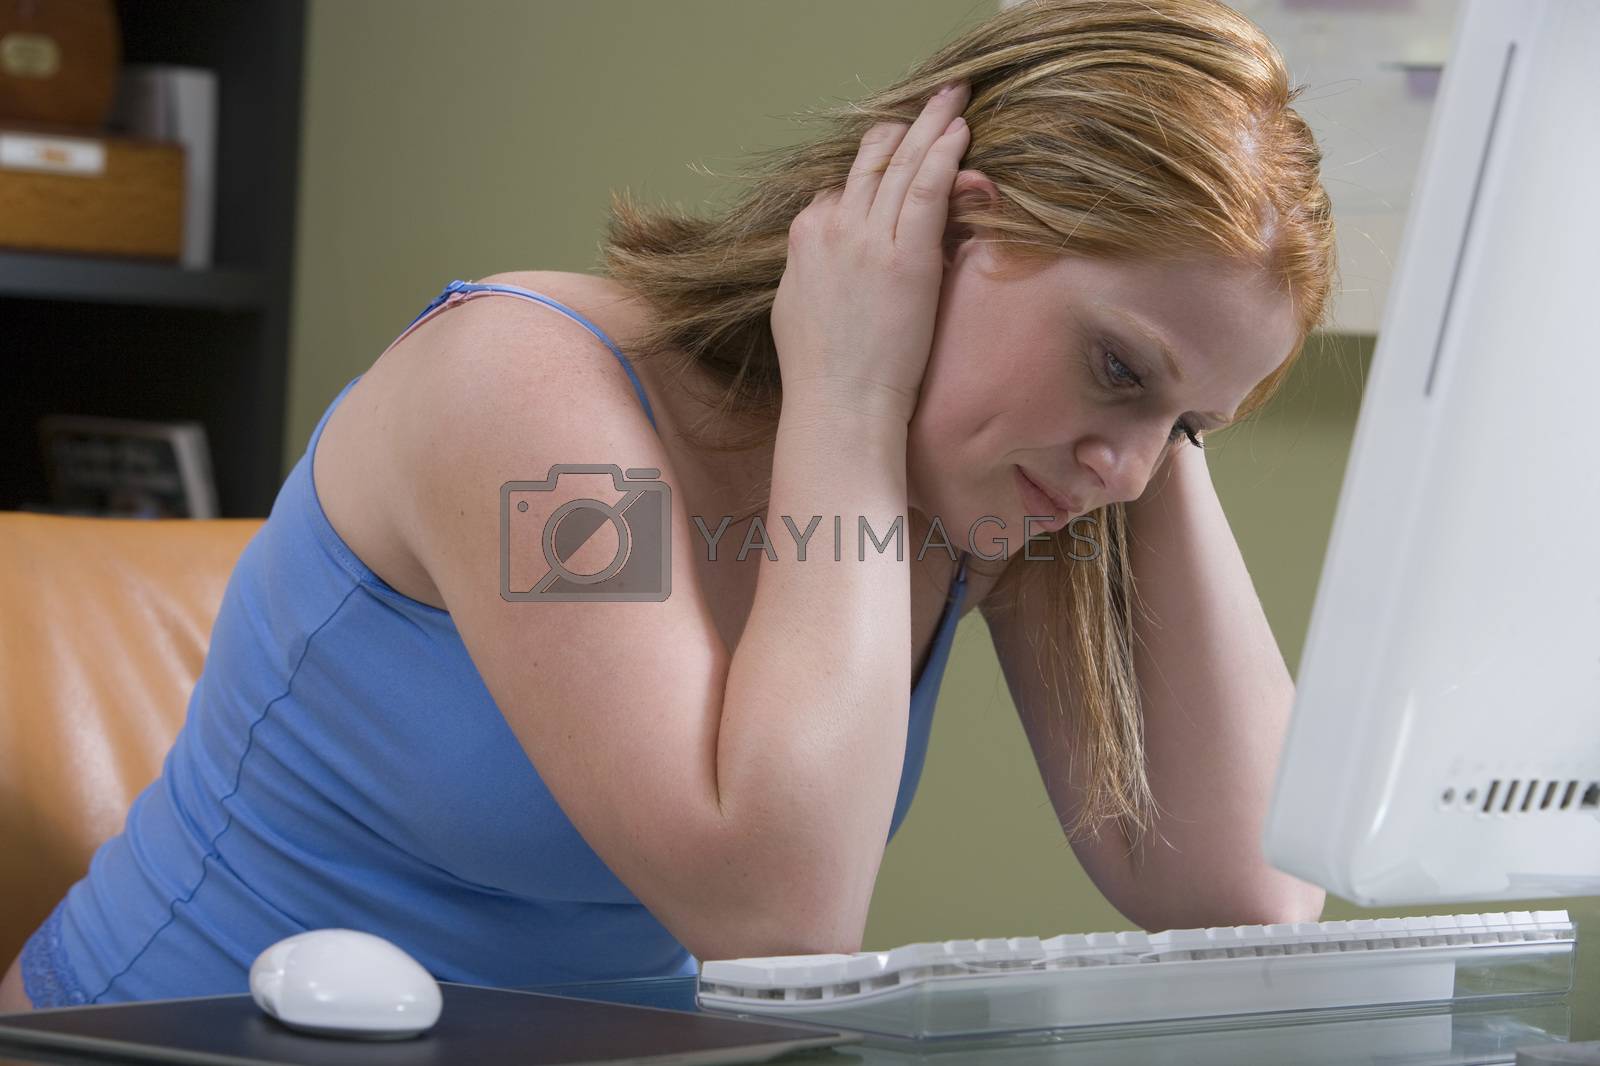 Royalty free image of Woman Using a Computer by moodboard